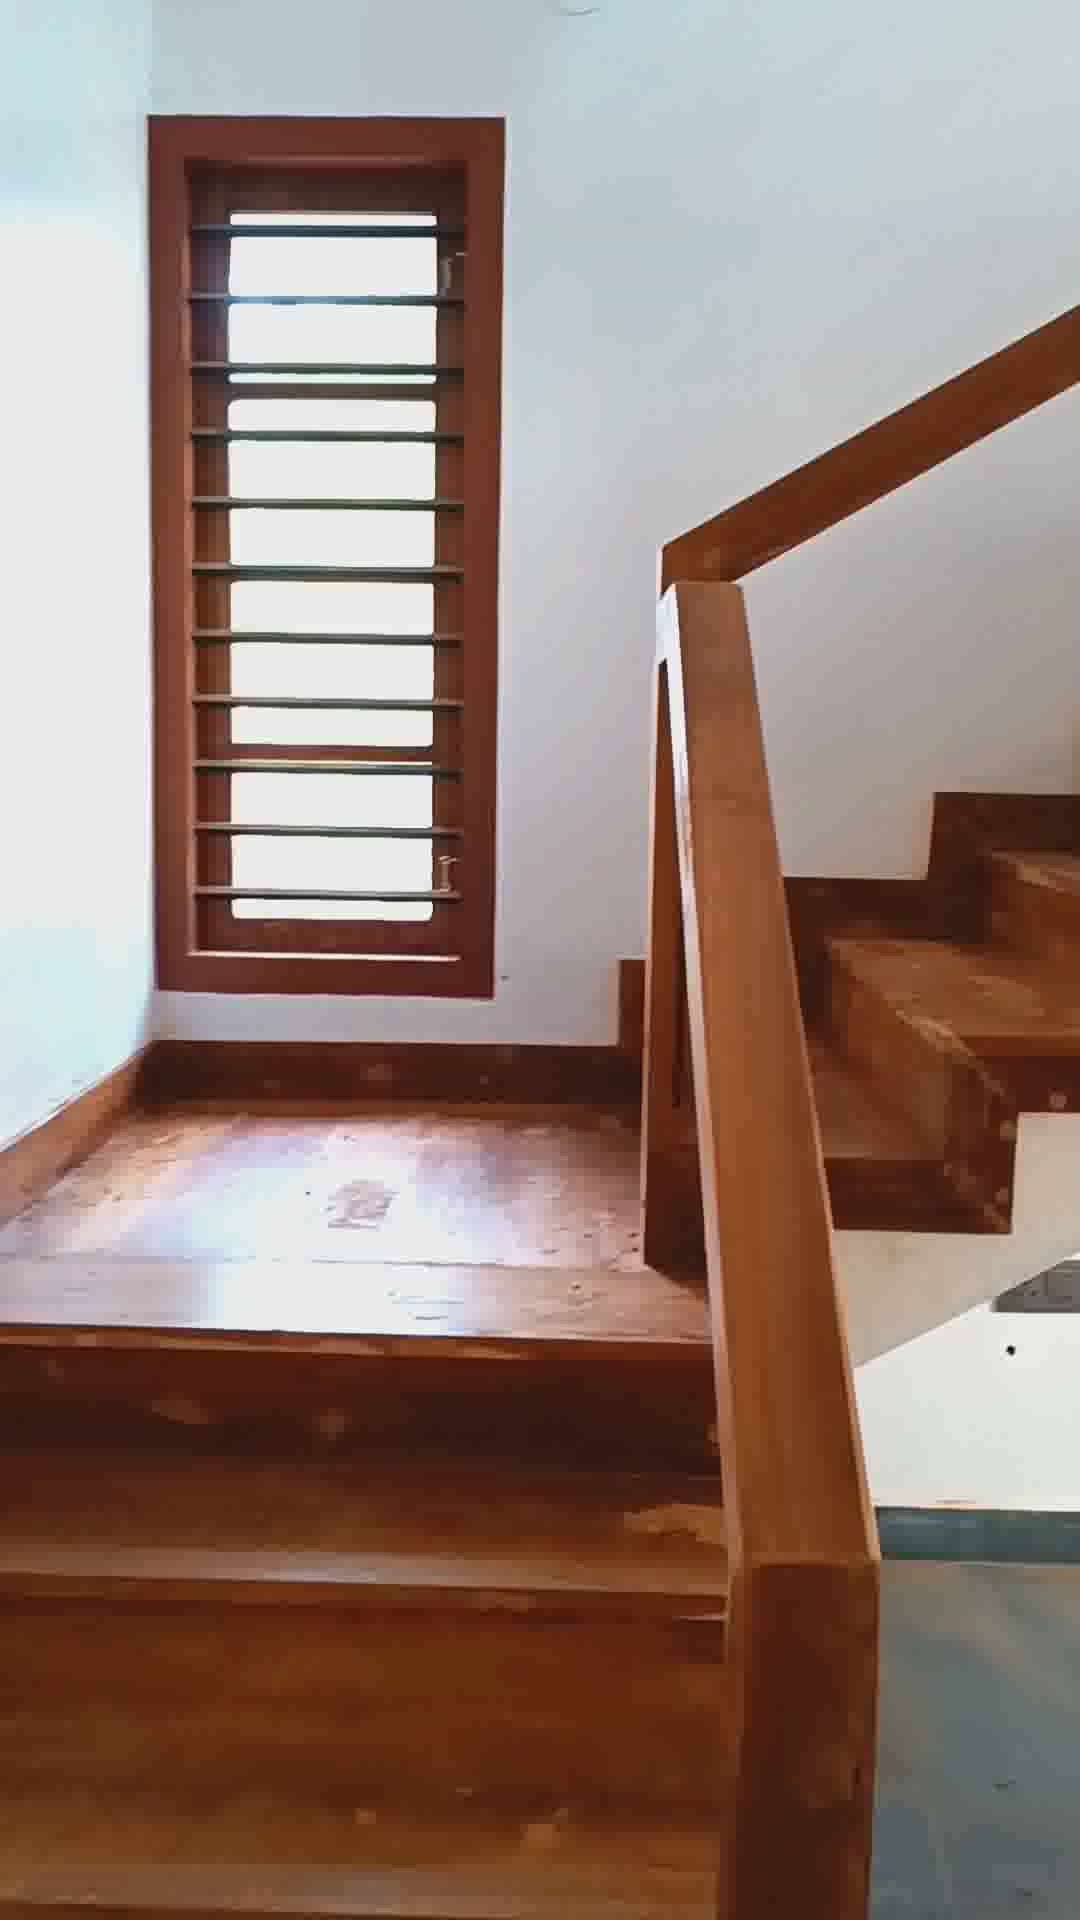 ongoing project
wooden flooring@ puthrncruz
#WoodenFlooring  #WoodenStaircase  #teakwoodflooring
 #woodenhandrails 
 #qualitywood